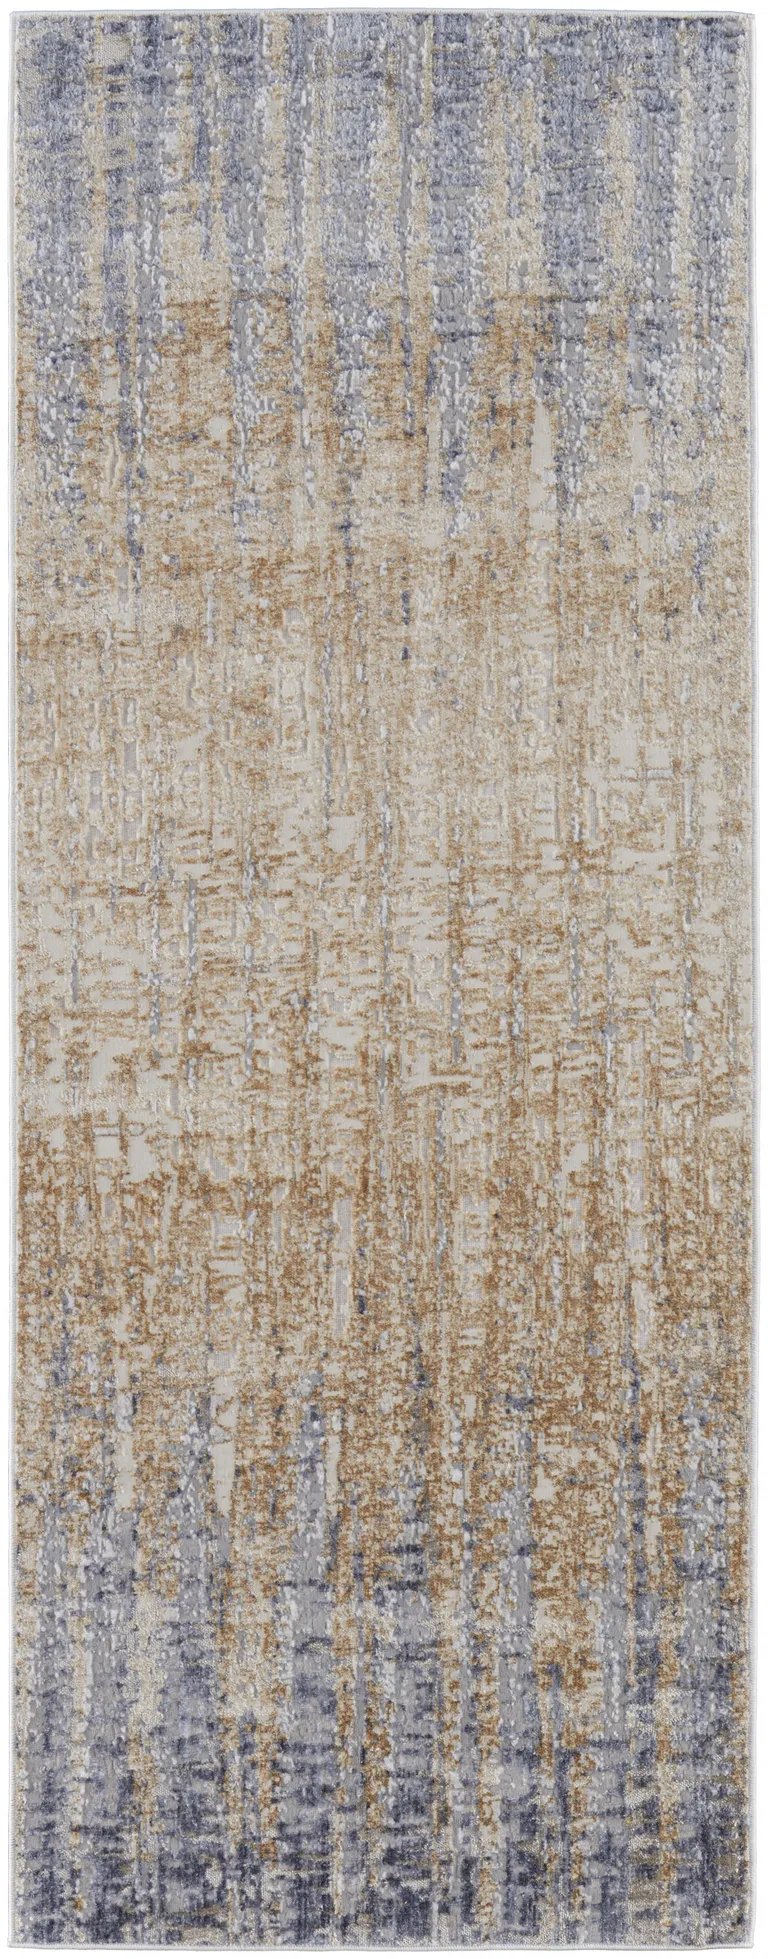 10' Tan Brown And Blue Abstract Power Loom Distressed Runner Rug Photo 1